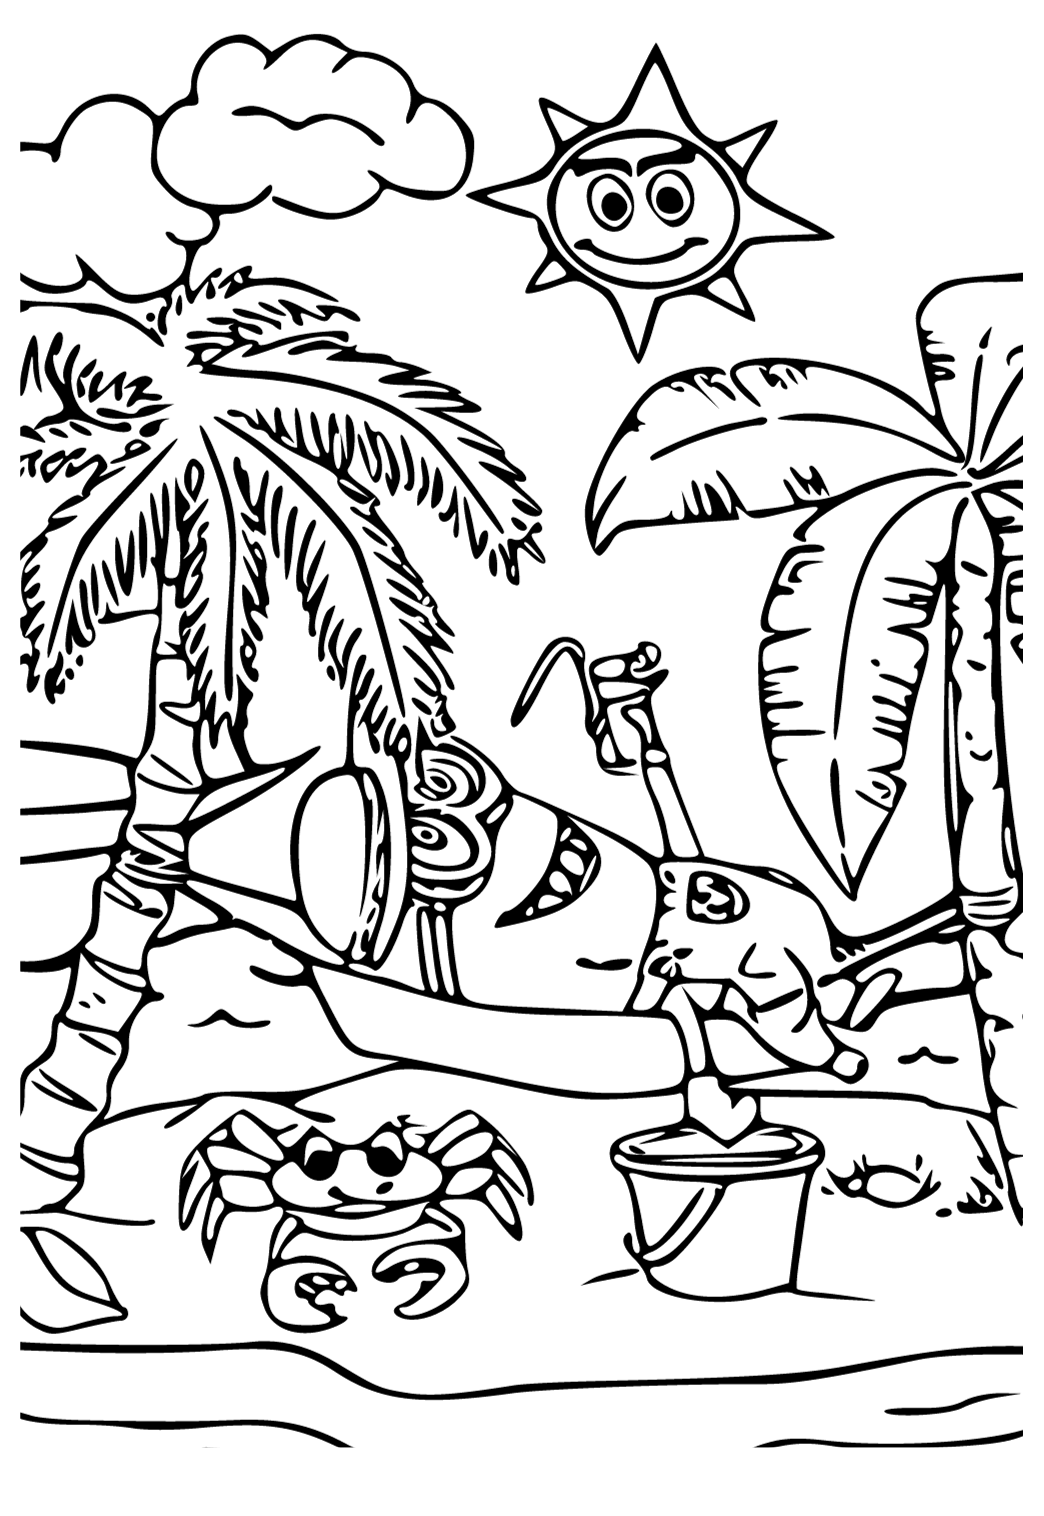 free-printable-hawaii-minion-coloring-page-for-adults-and-kids-lystok